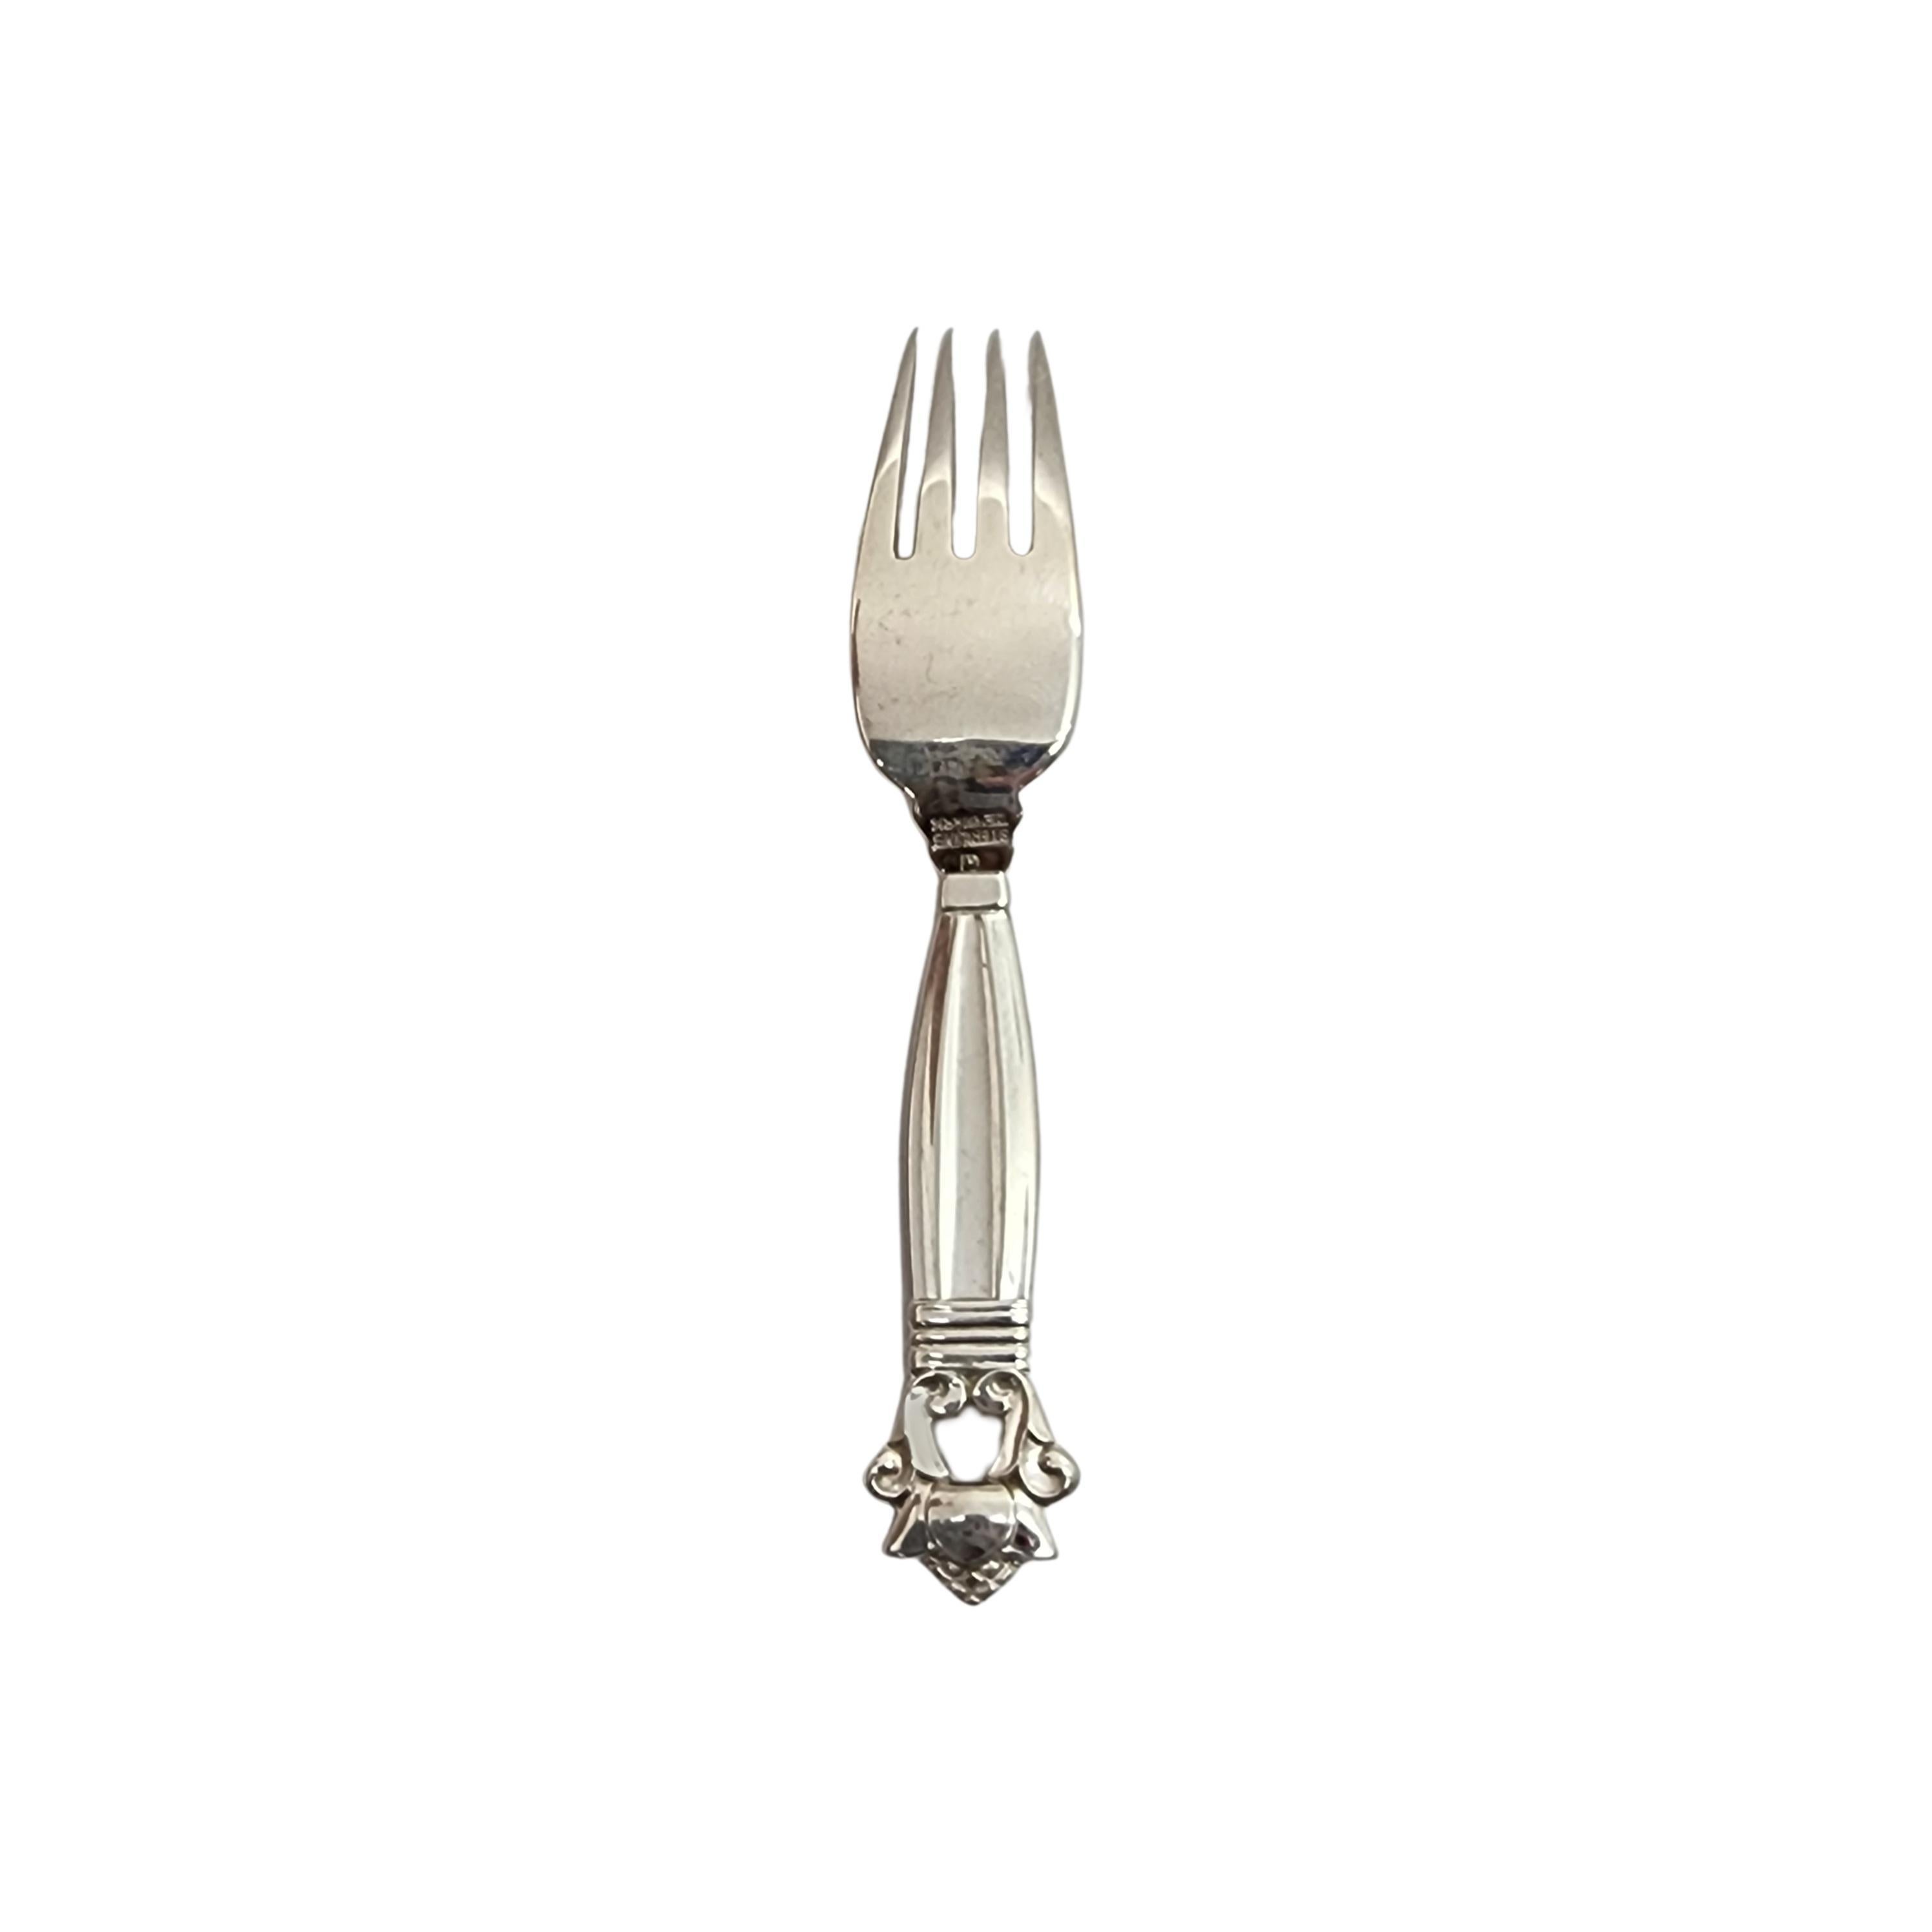 Sterling silver child fork in the Acorn pattern by Georg Jensen.

The Acorn pattern was introduced in 1915 as a collaboration between Georg Jensen and designer Johan Ronde. The Acorn pattern, which combines Art Nouveau and Art Deco styles, has